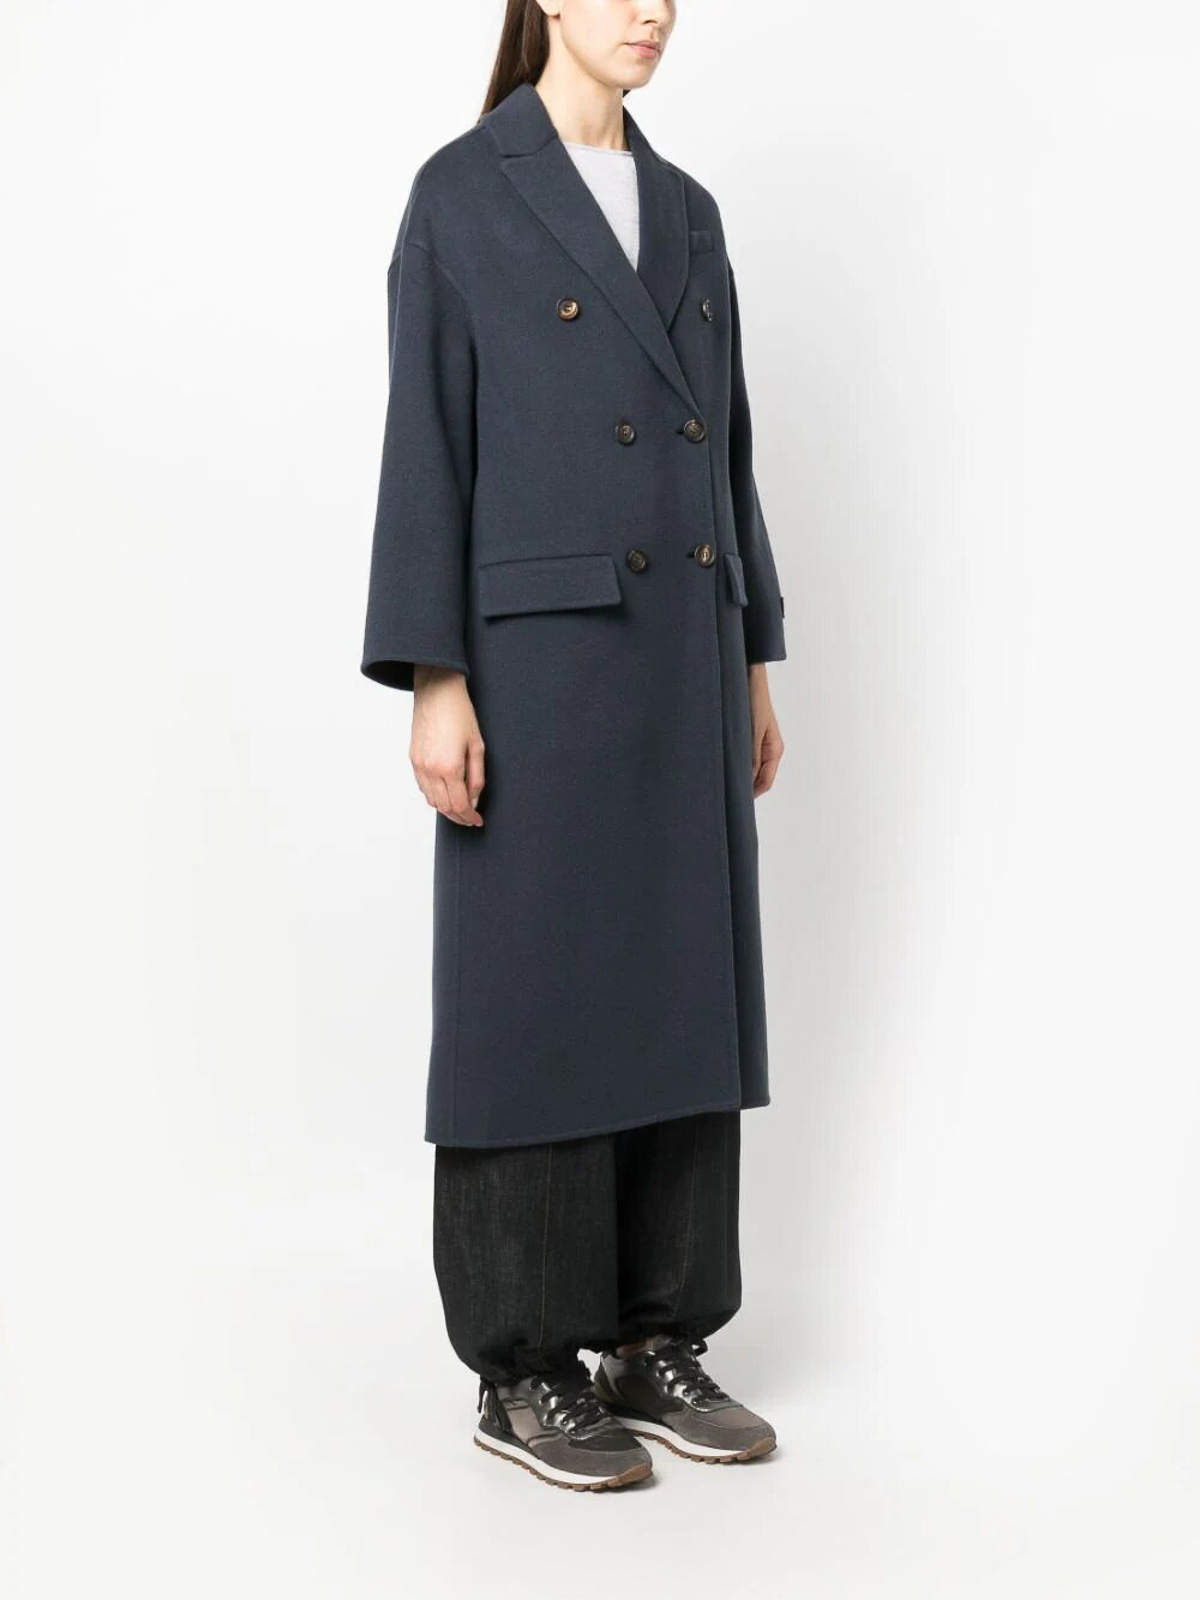 Brunello CUCINELLI Hand-Crafted Double Cloth Coat